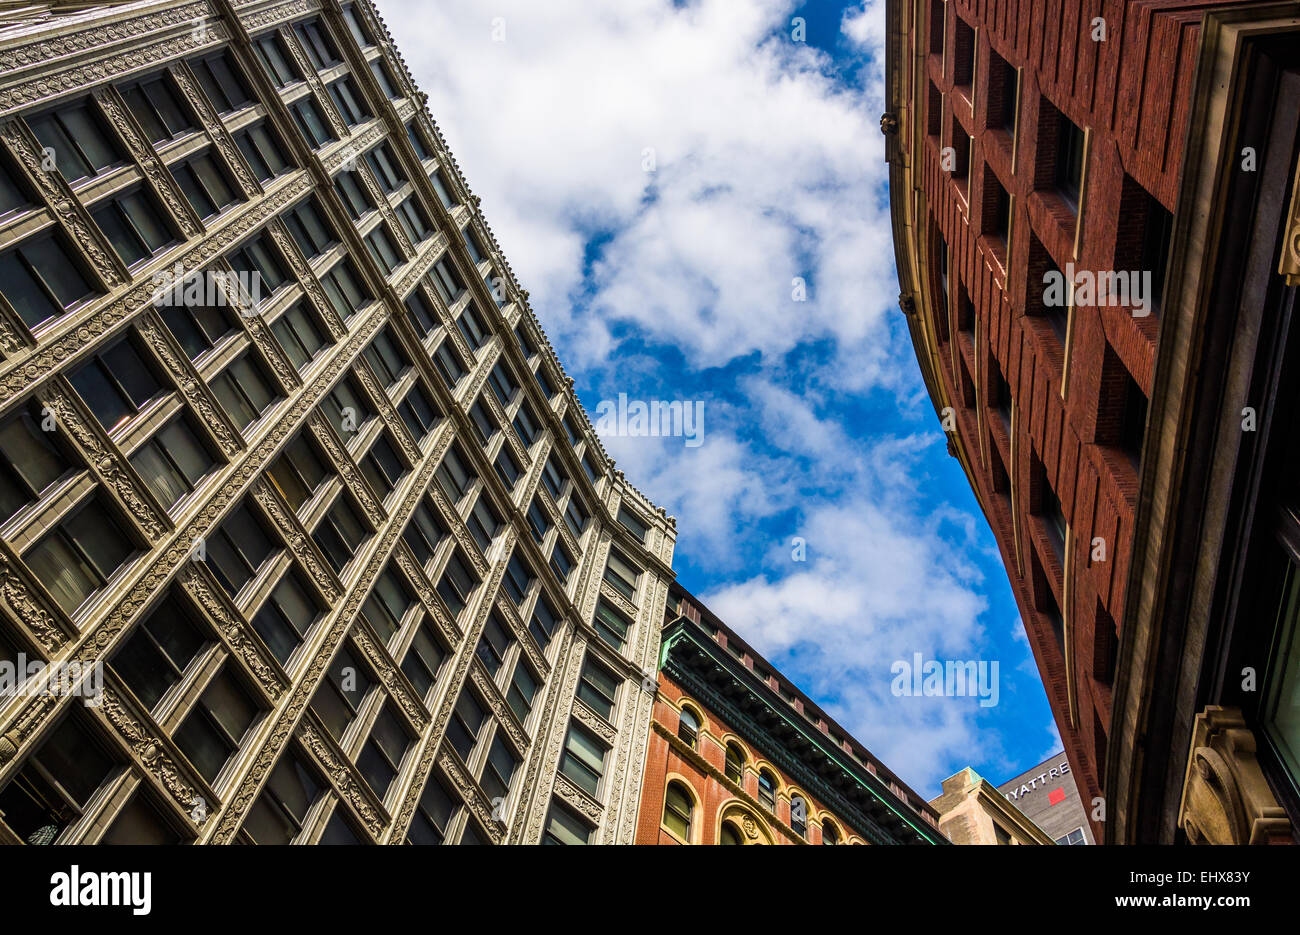 Looking up at old architecture in Boston, Massachusetts. Stock Photo